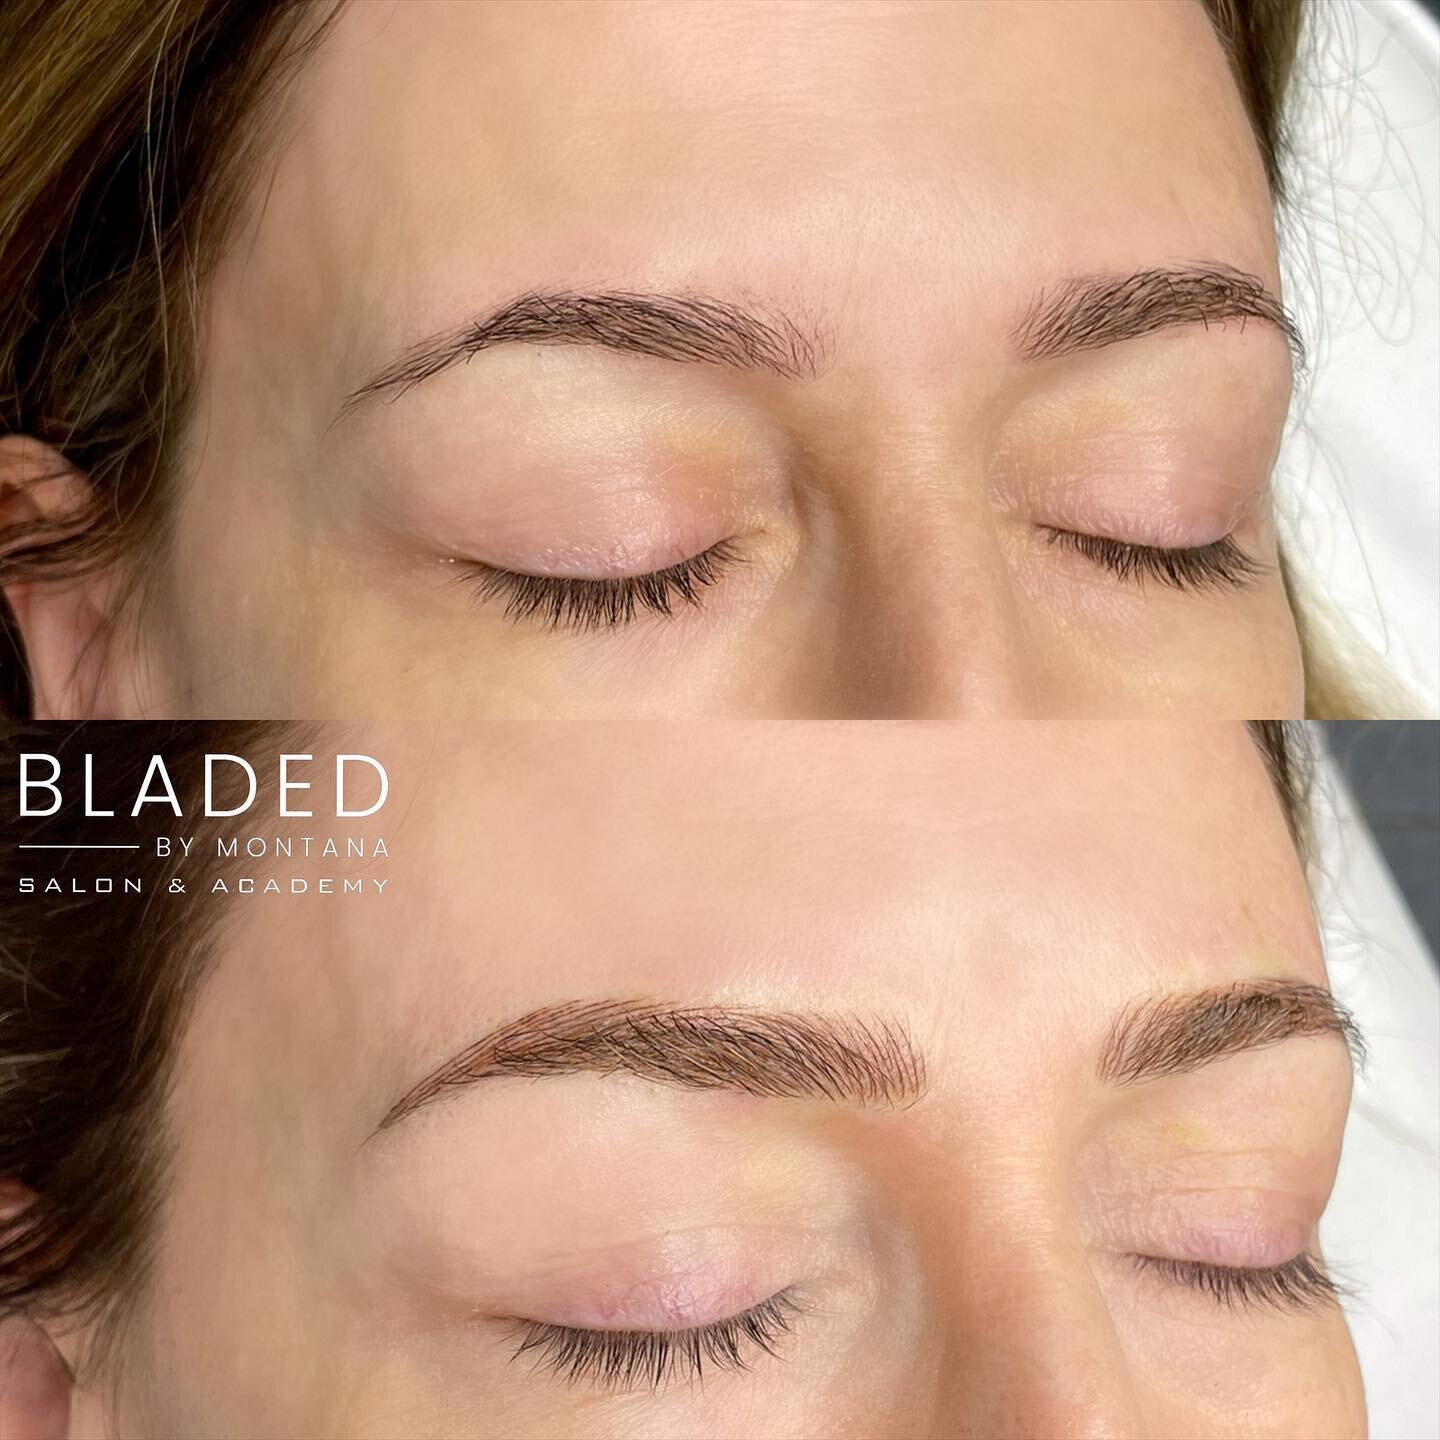 Seamless Microblading 🙌🏼
Undetectable realistic hair strokes to define and enhance what you may or may not have as a brow! 

👉🏼correct asymmetry 
👉🏼lift or create your arch 
👉🏼add density 
👉🏼smudge proof, sweat proof, makeup free perfect br